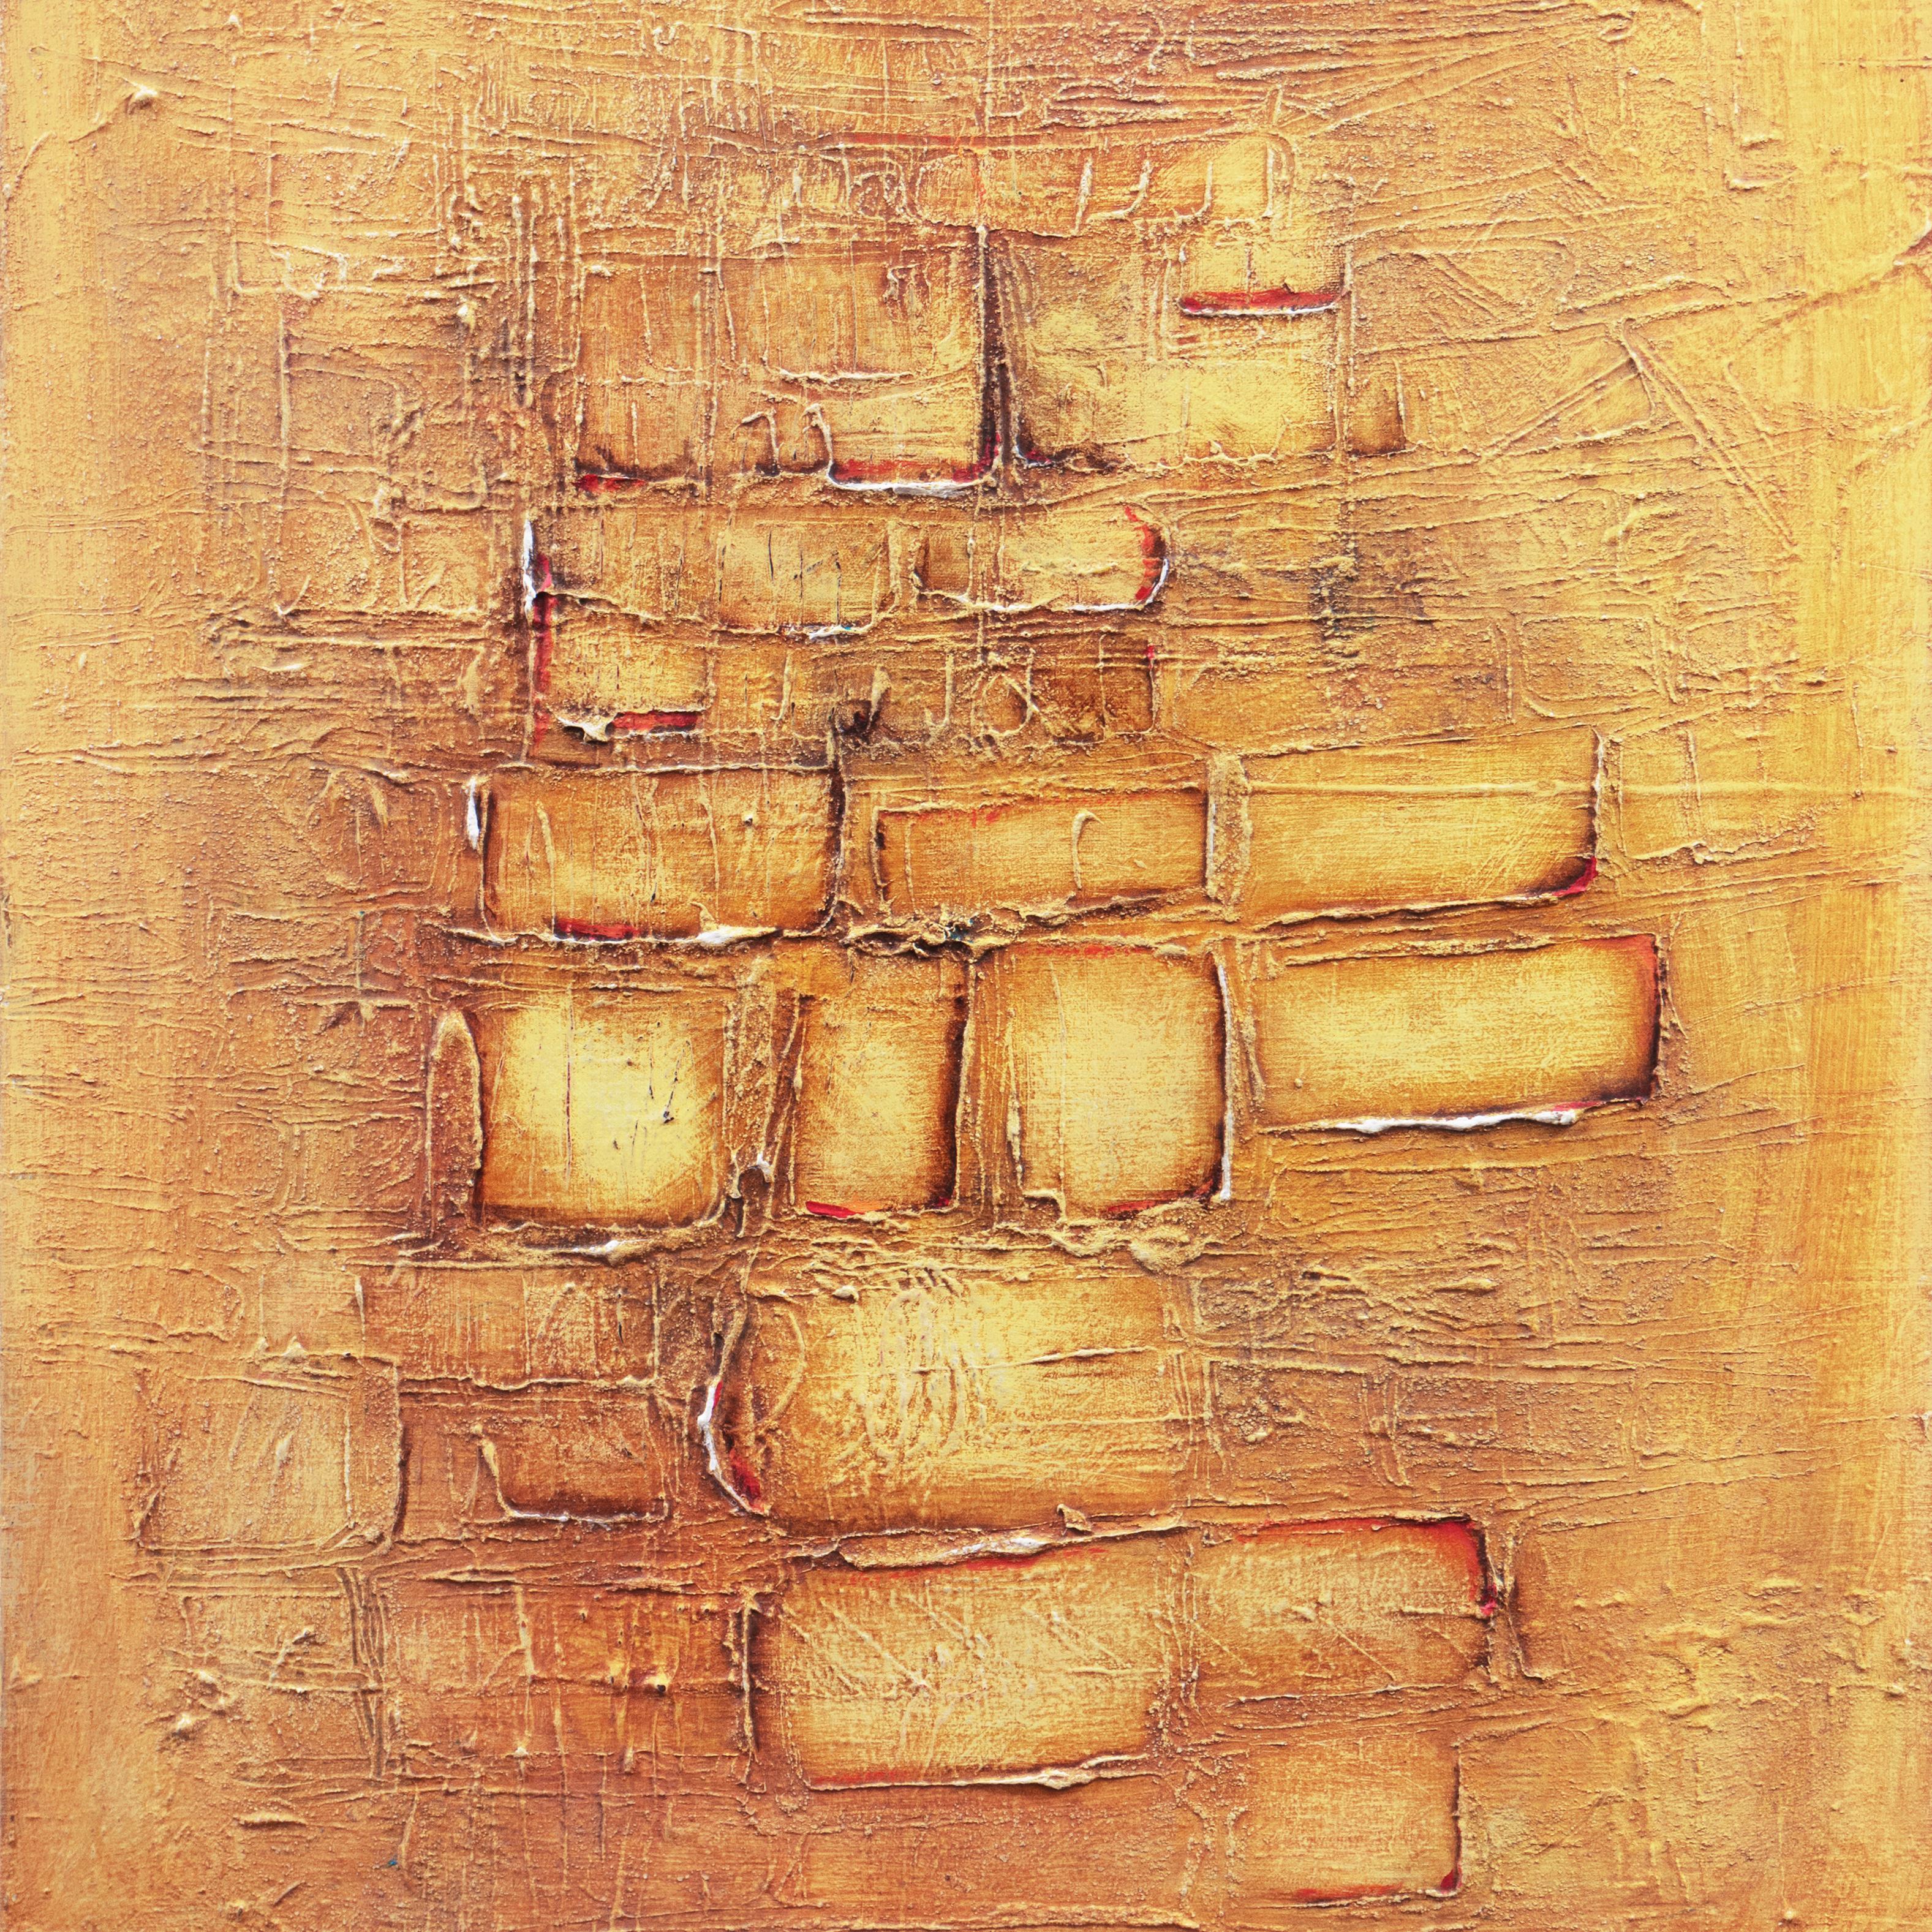 Signed lower right, 'V. Tharos' (American, 20th century) and dated 1970; additionally signed and dated verso. 
Previously with: Los Robles Art Gallery, Palo Alto, California

A substantial, mid-century abstract comprising stacked rectangles in